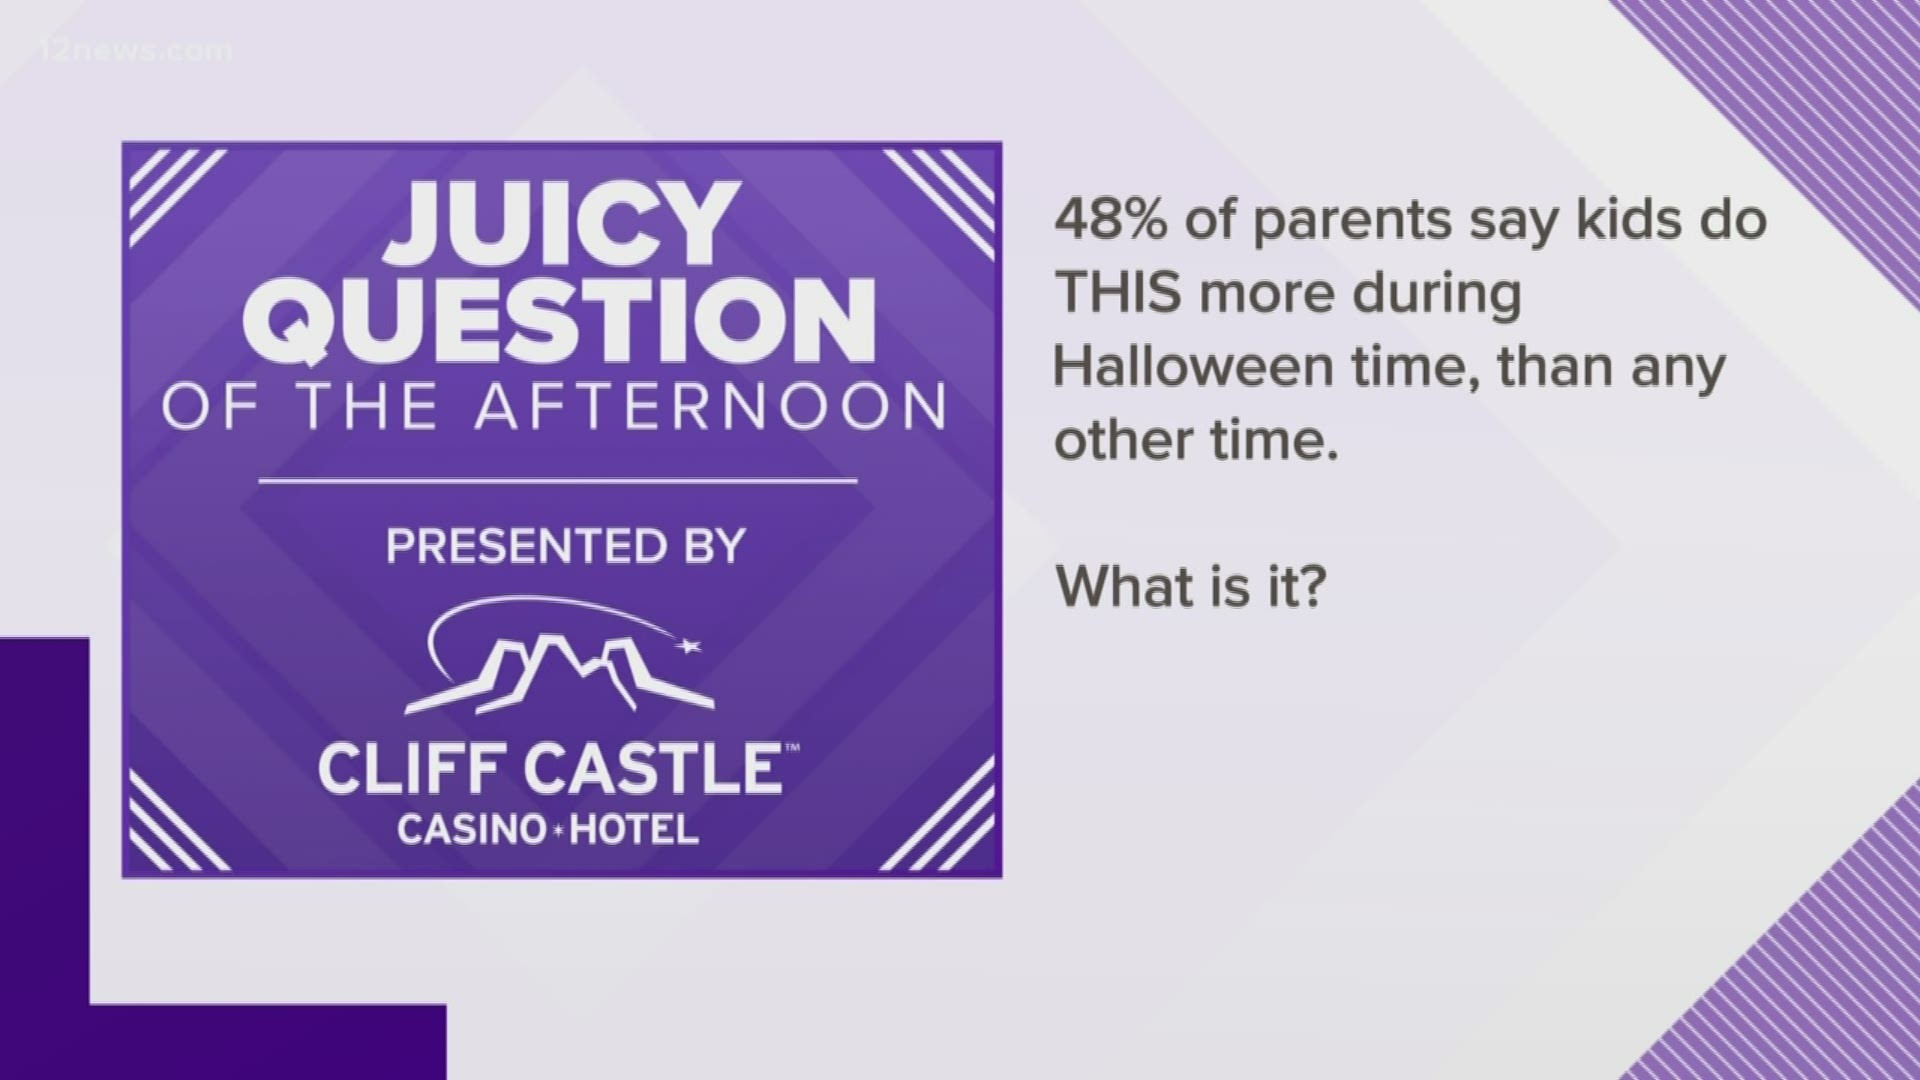 48% of parents say kids do THIS more during Halloween time than any other time. What is it?